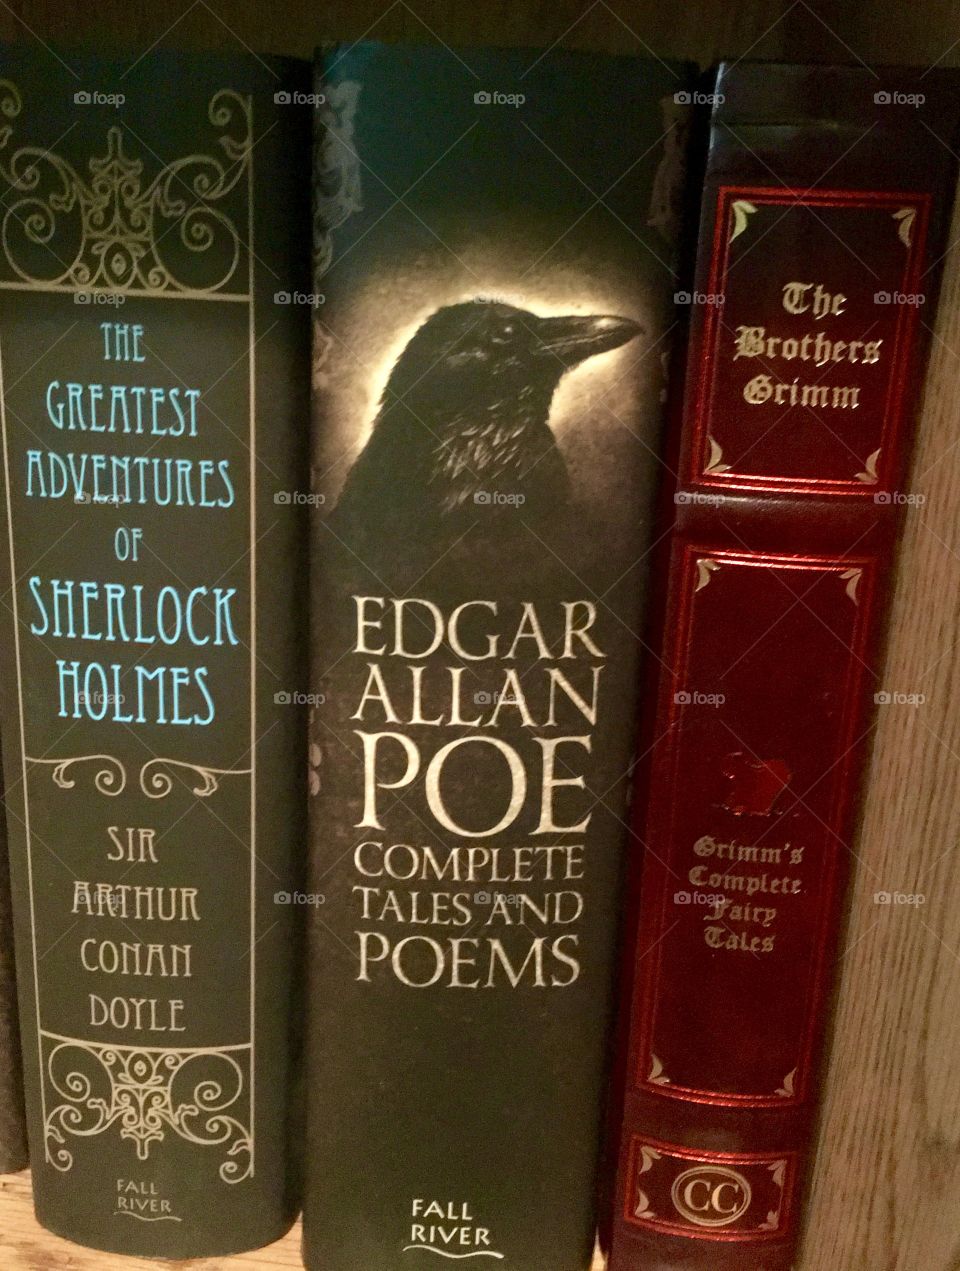 
The Greatest Adventures of Sherlock Holmes,
Edgar Allan Poe Complete Tales and Poems, and
Grimm's Complete Fairy Tales.
Three books that I got all at the same time but which book should I read first?